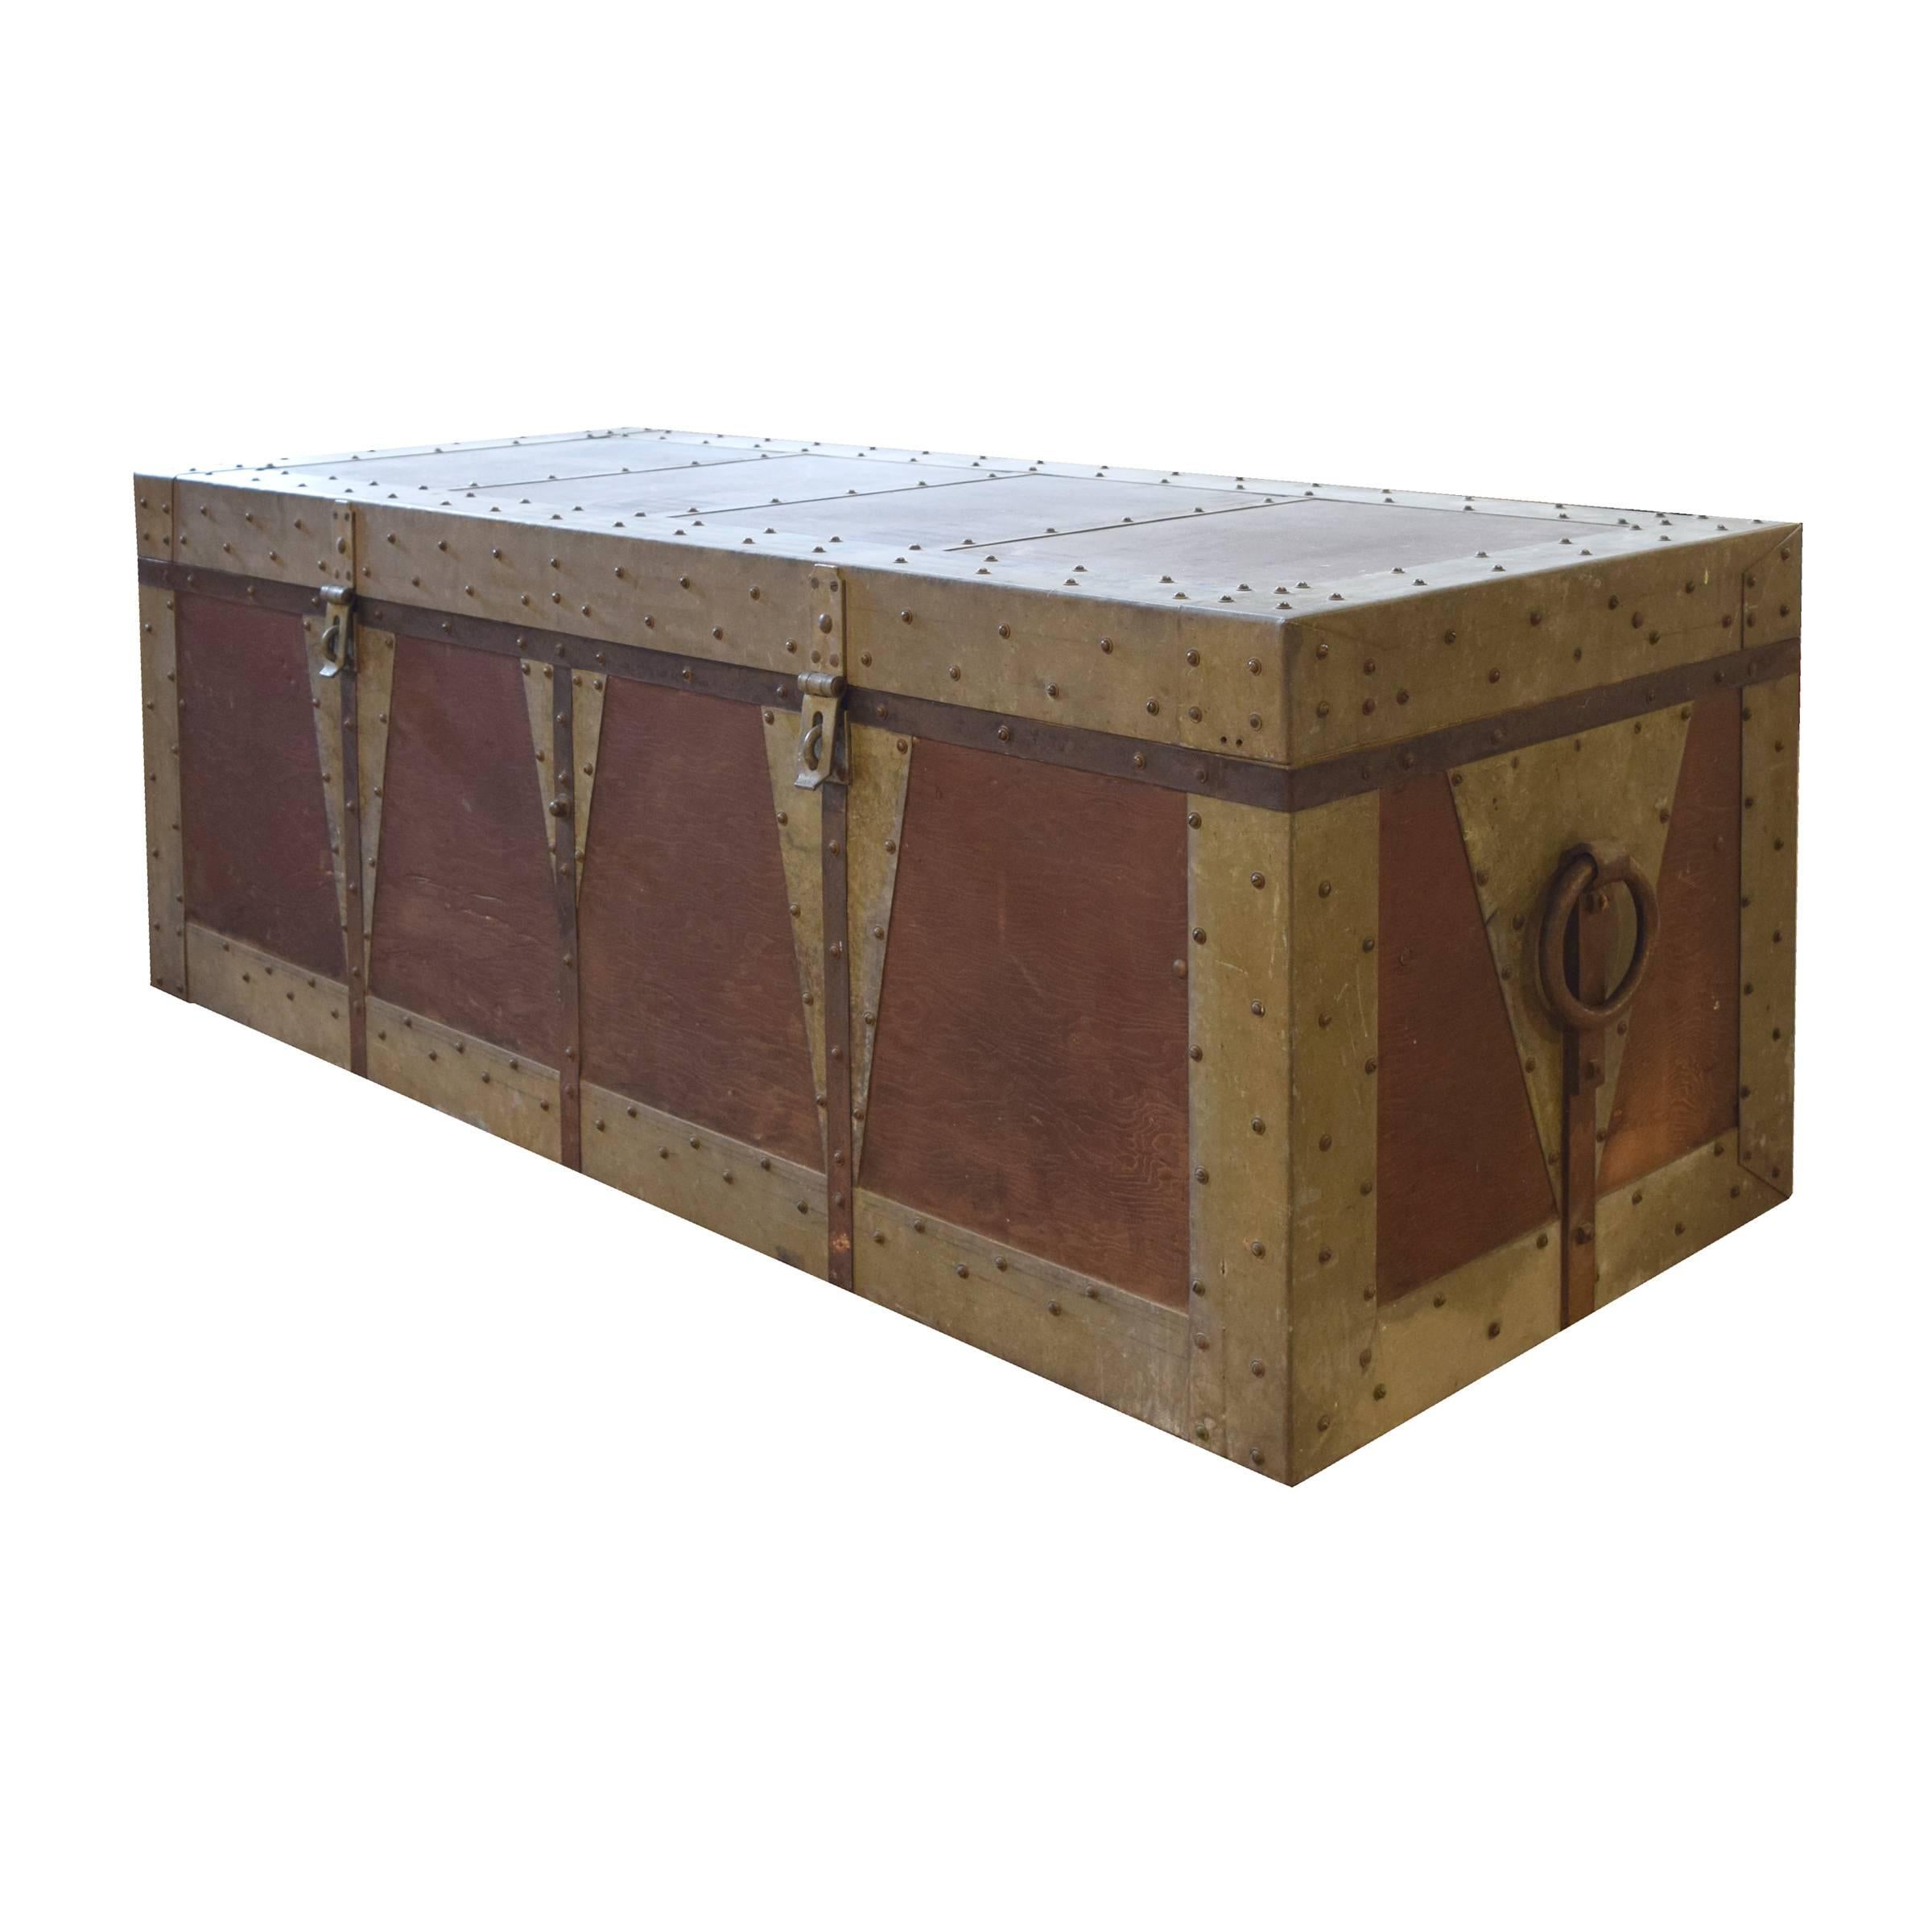 A very cool American wood and metal magician's trunk with two front latches and a handle on each end, as well as a removable interior top drawer.